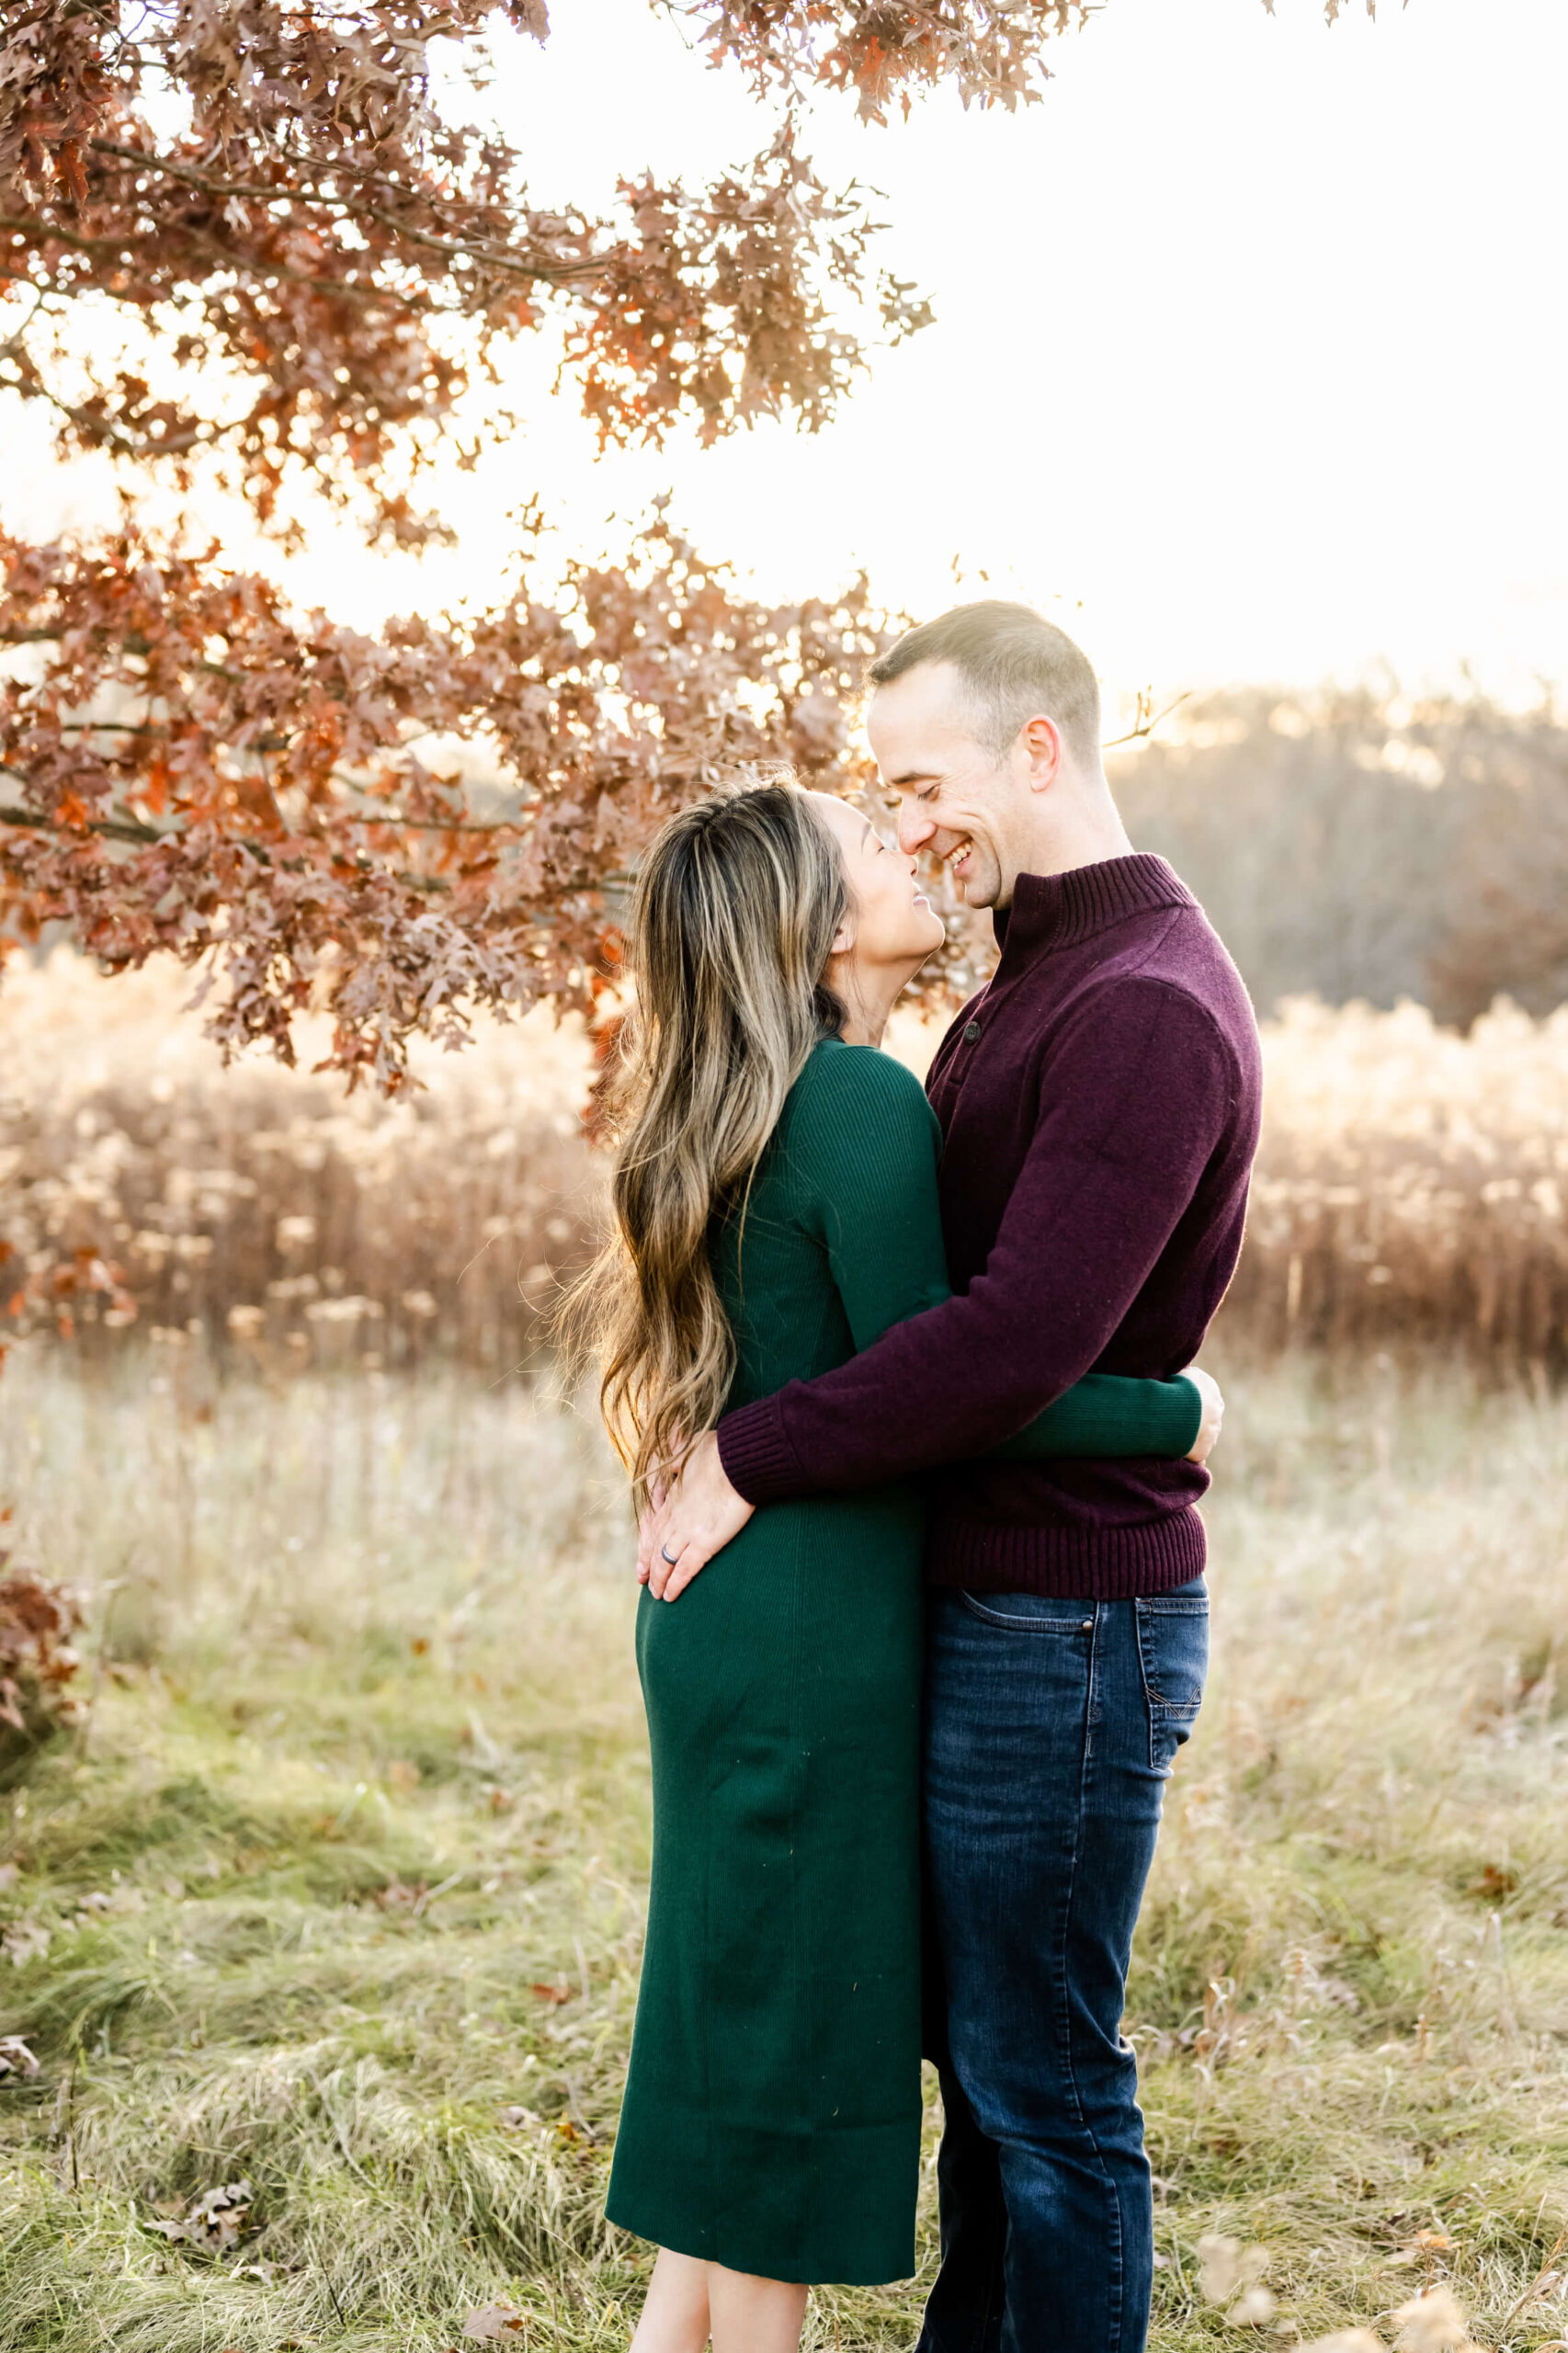 Couple touching noses and smiling in a close embrace with fall colors